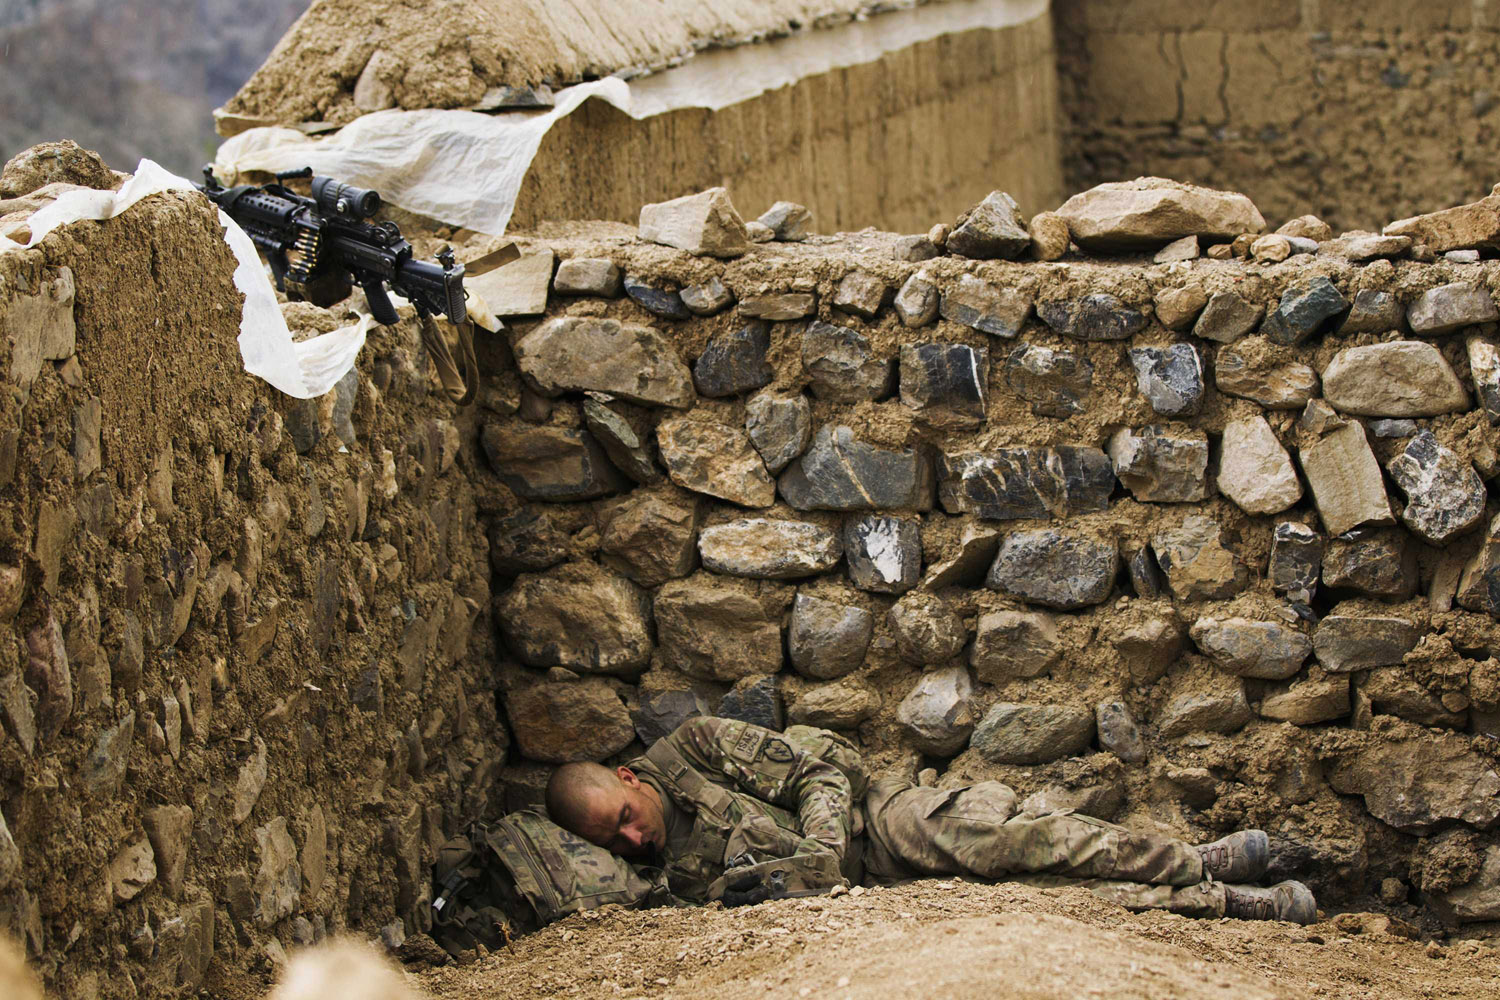 July 16, 2012. A paratrooper rests towards the end of a helicopter assault mission near the town of Ahmad Khel in Afghanistan's Paktiya Province.